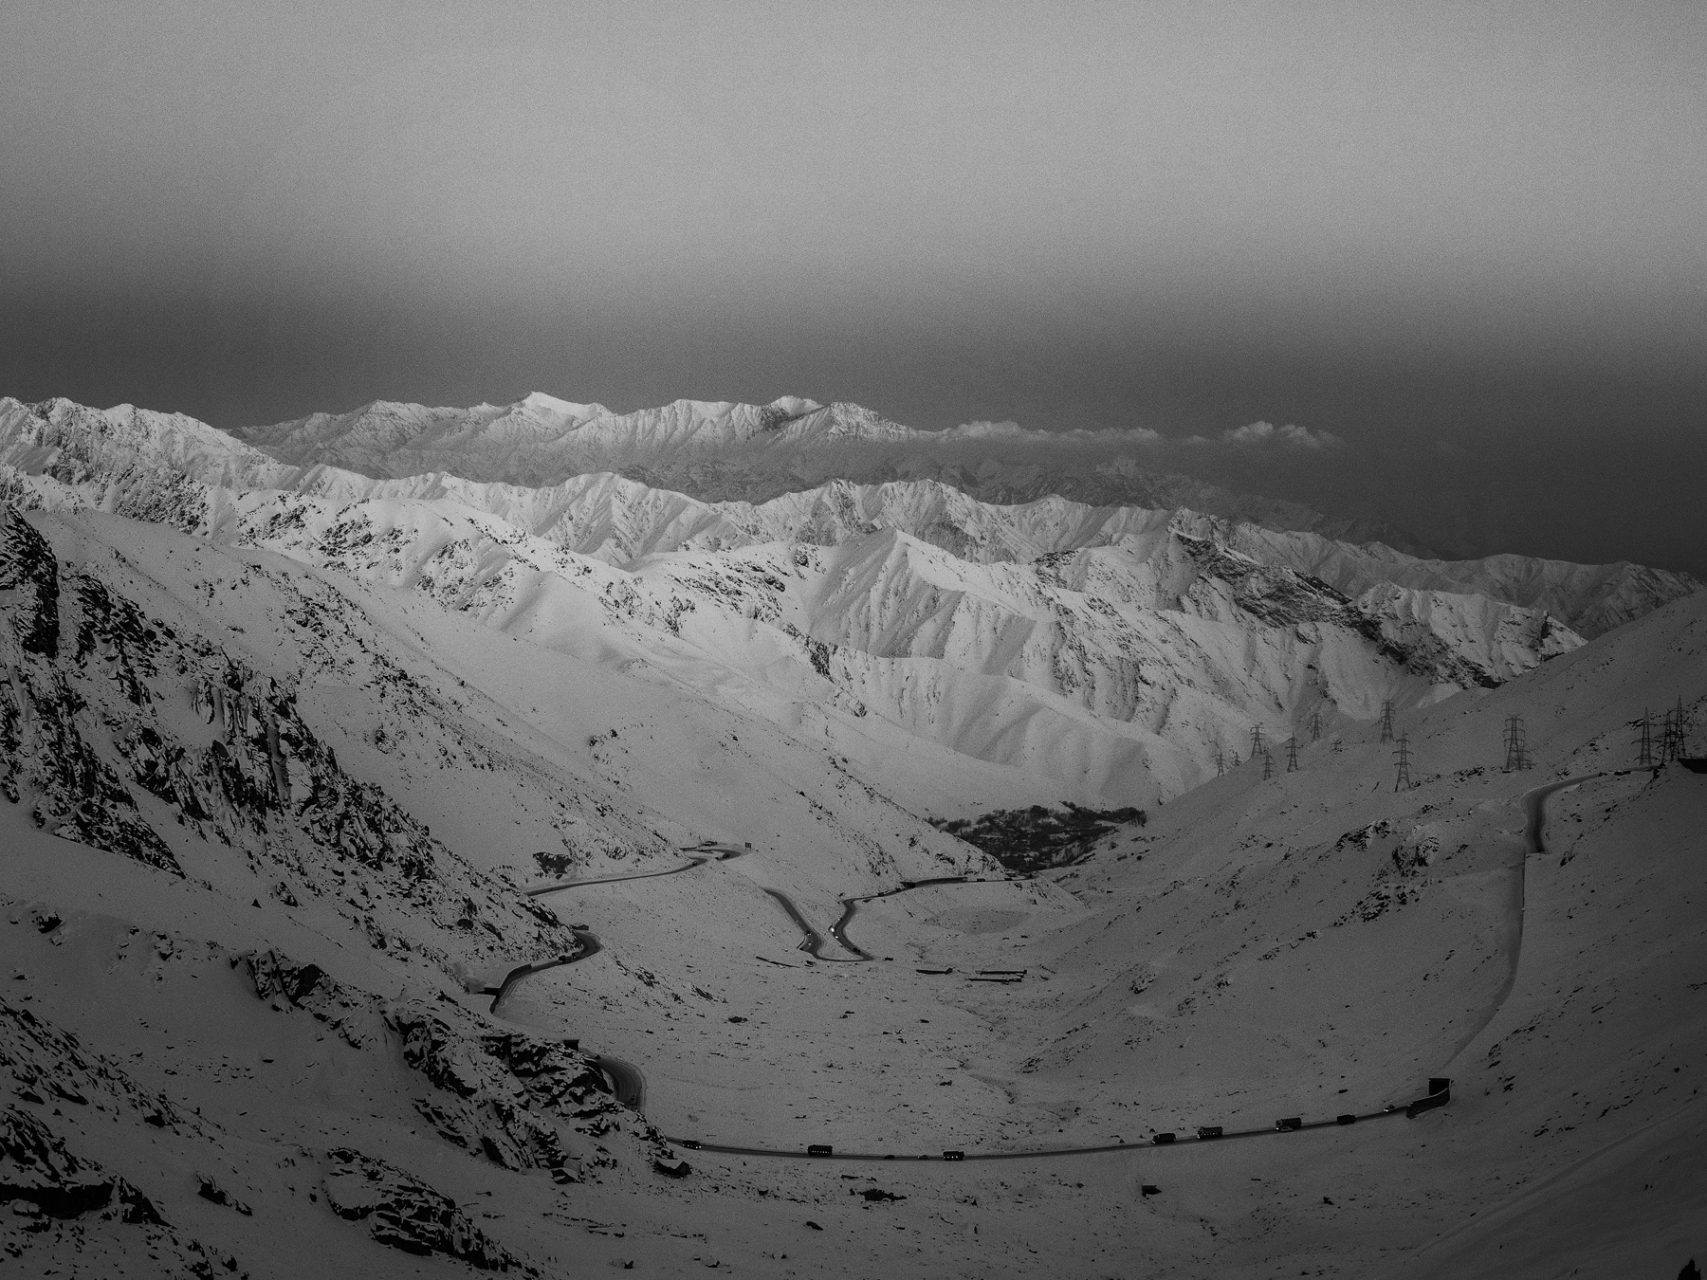 4000er peaks of the Hindu Kush build a panorama to the southern side of the Salang pass.